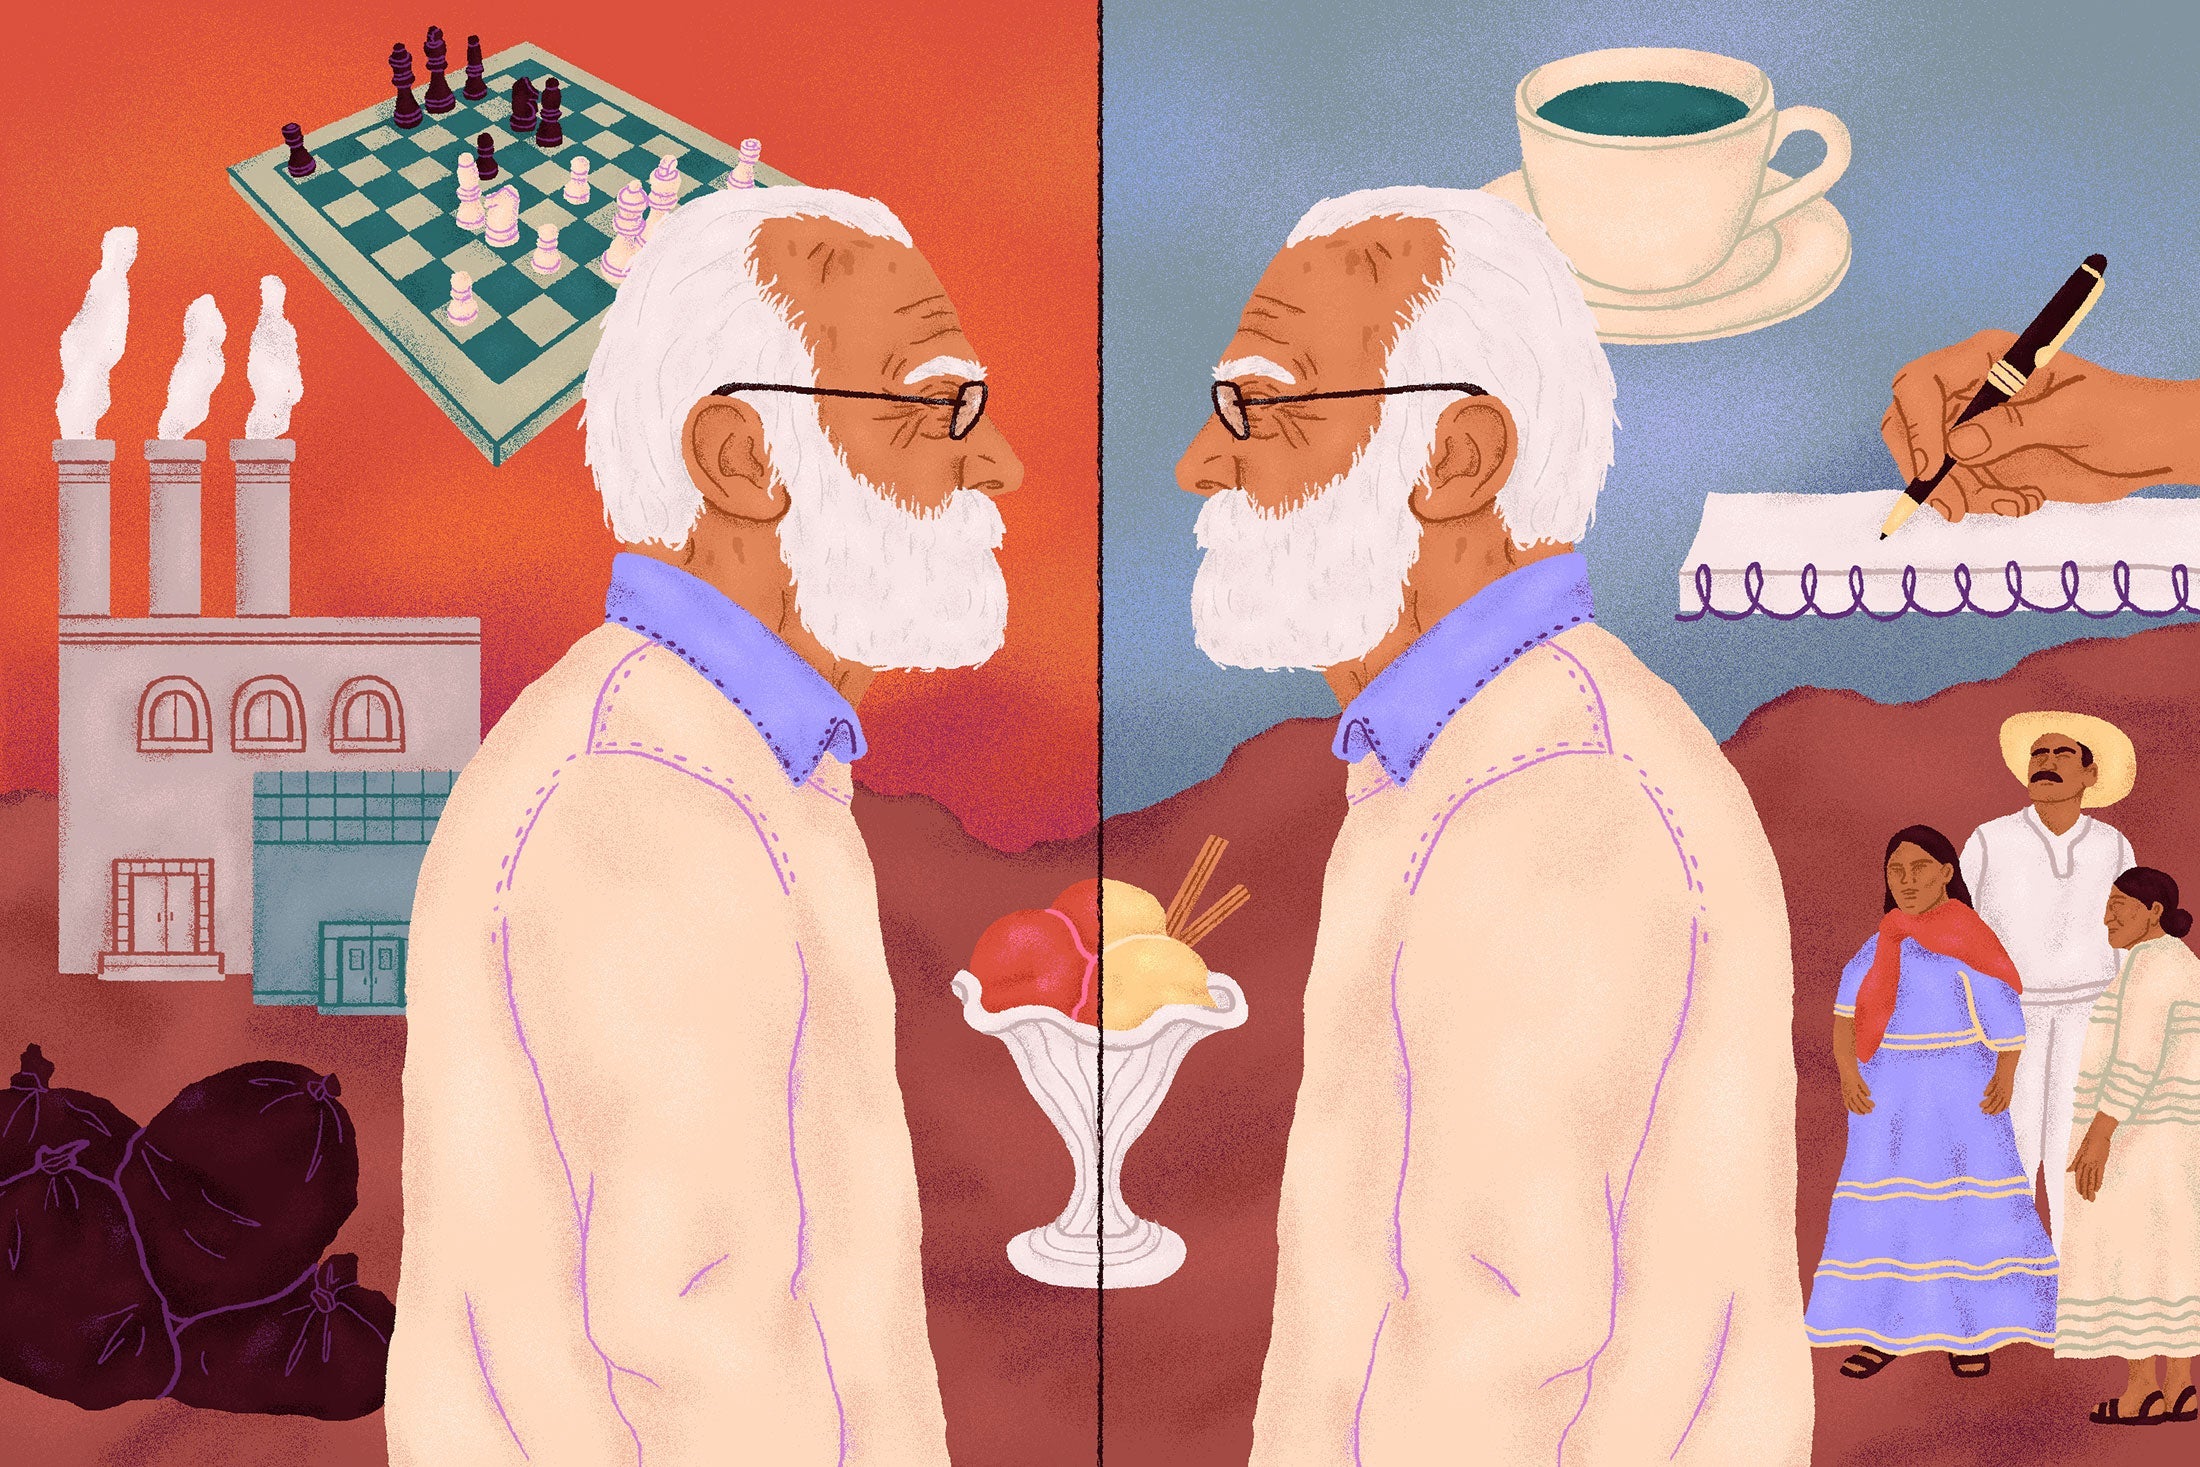 A man with white hair and eyeglasses facing his mirror image.